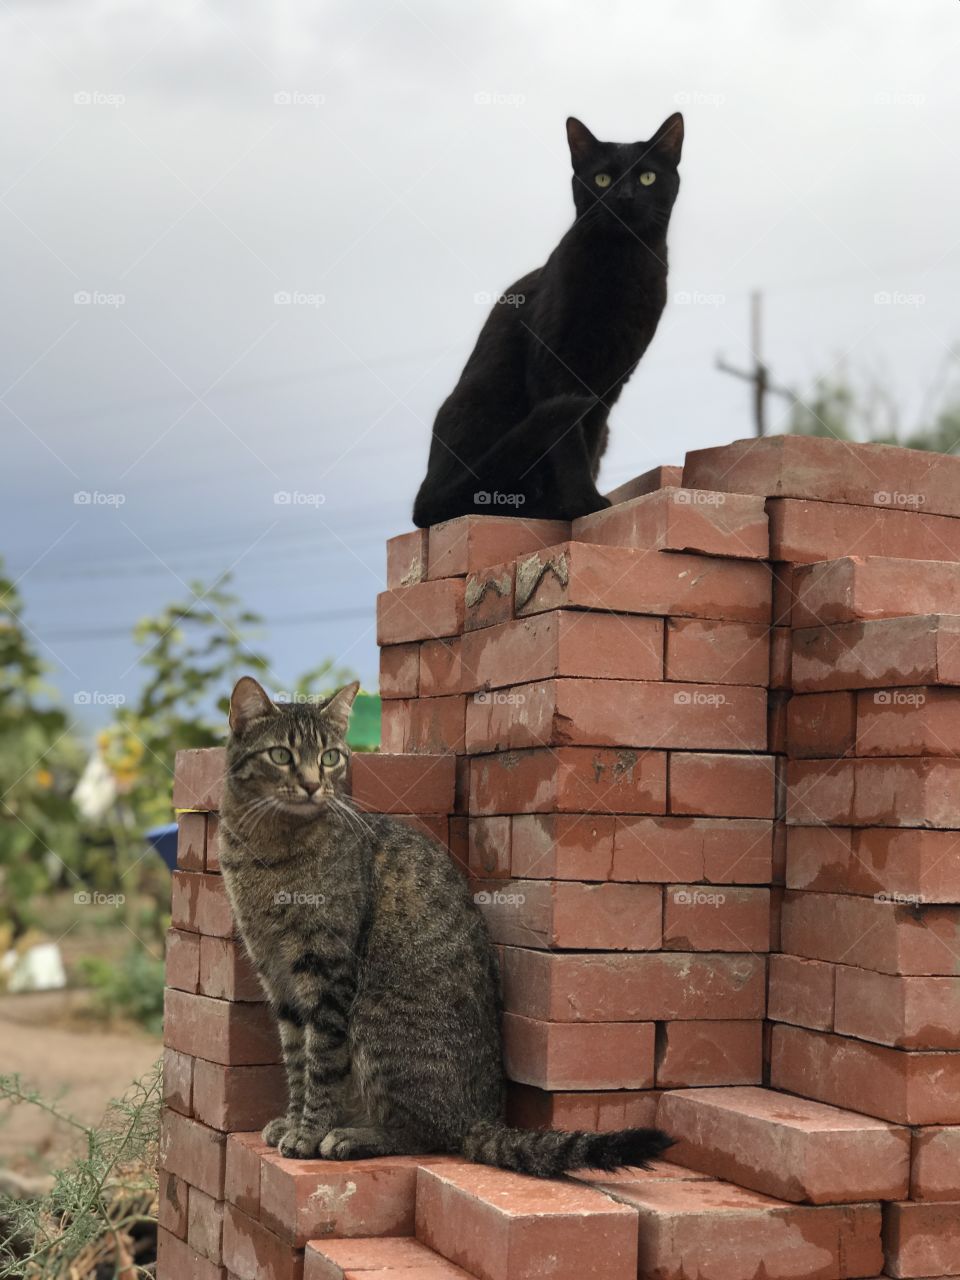 Our two beautiful kitties perched on a stack of bricks, guard our garden, keeping a close eye out for mice and squirrels! 